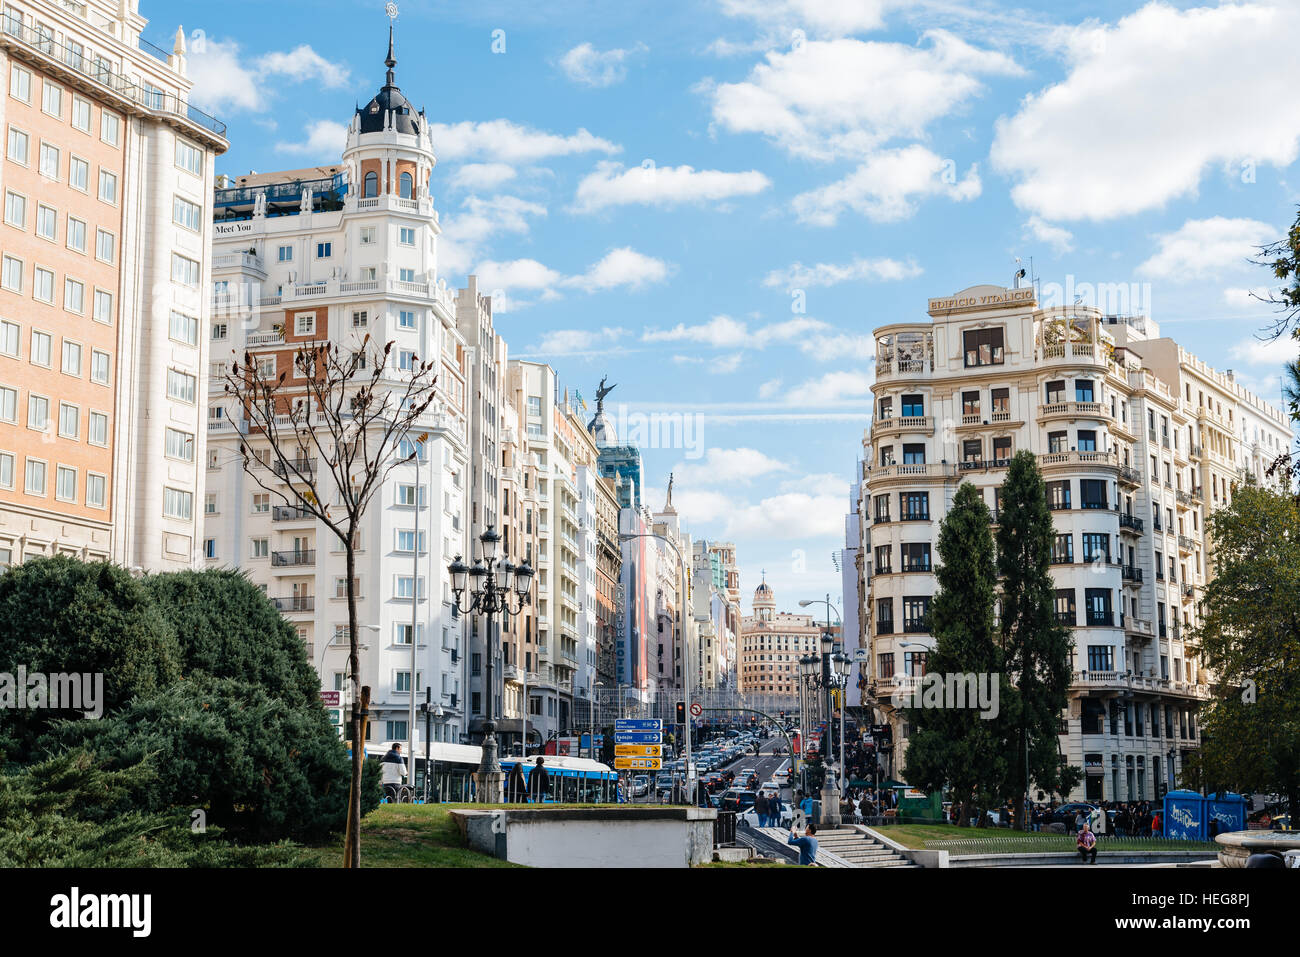 Madrid, Spain - November 13, 2016: Gran Via in Madrid. It is an ornate and upscale shopping street located in central Madrid. It is known as the Spani Stock Photo